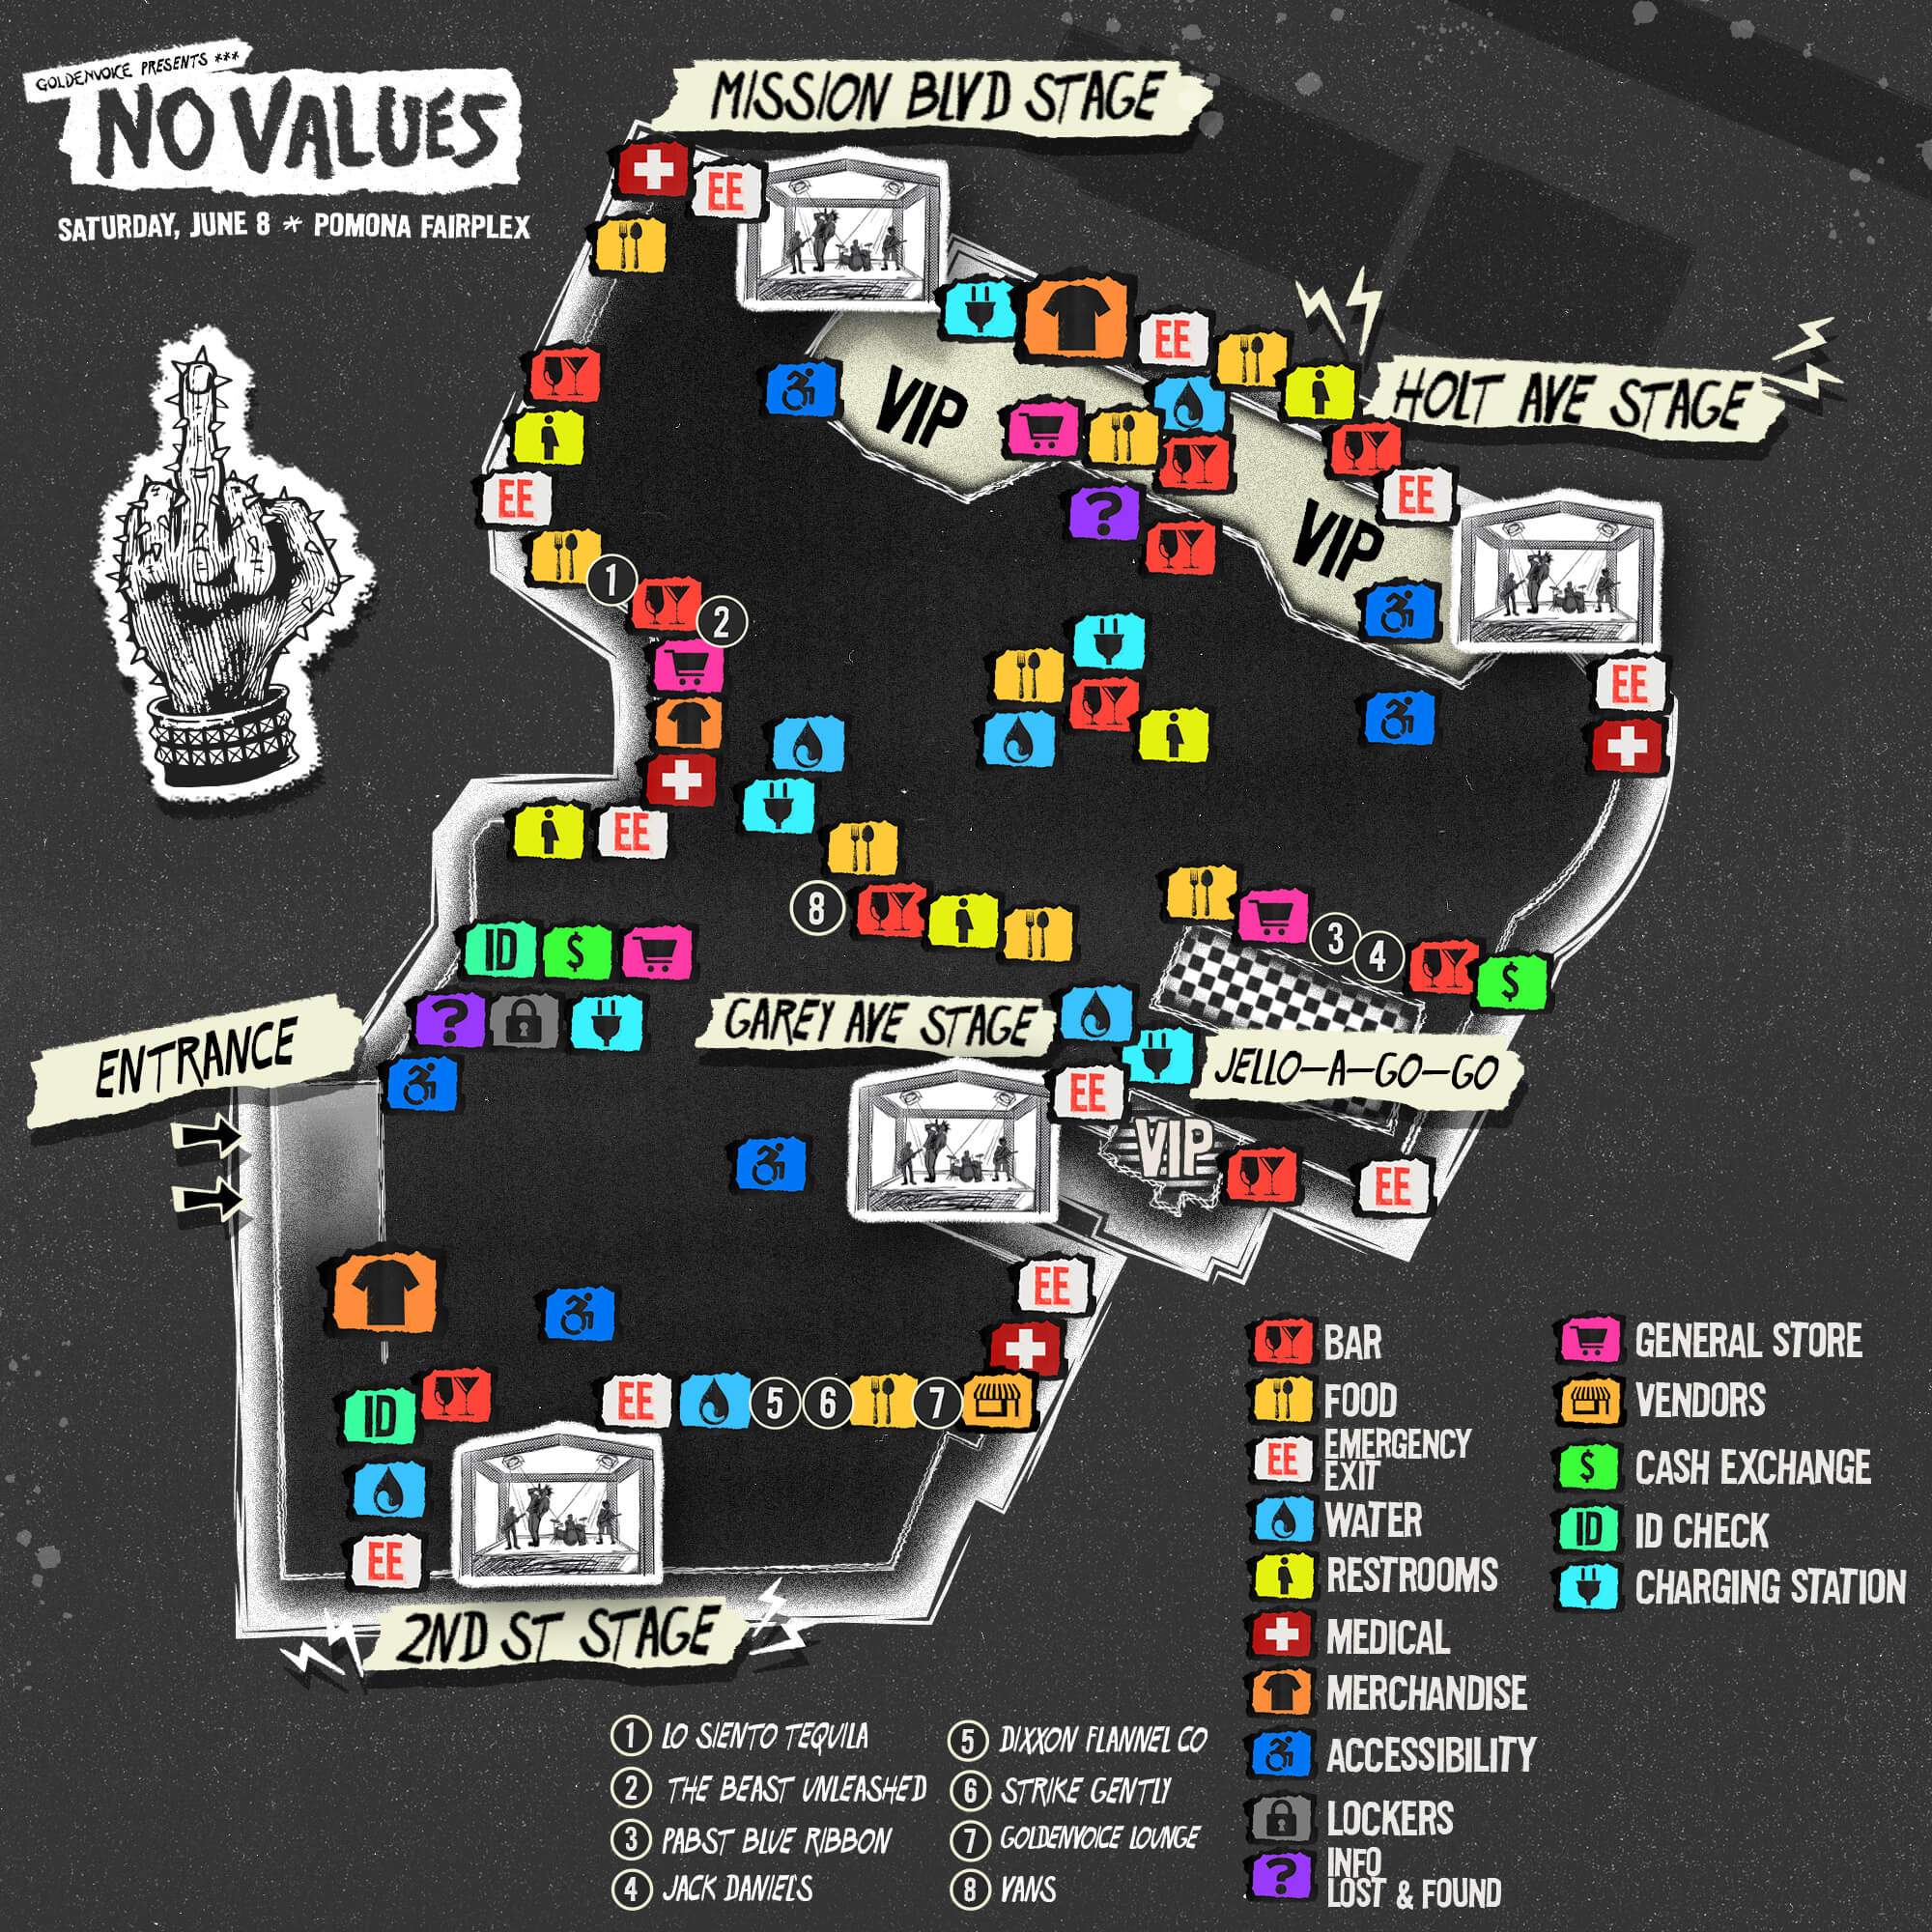 No Values Preview Map